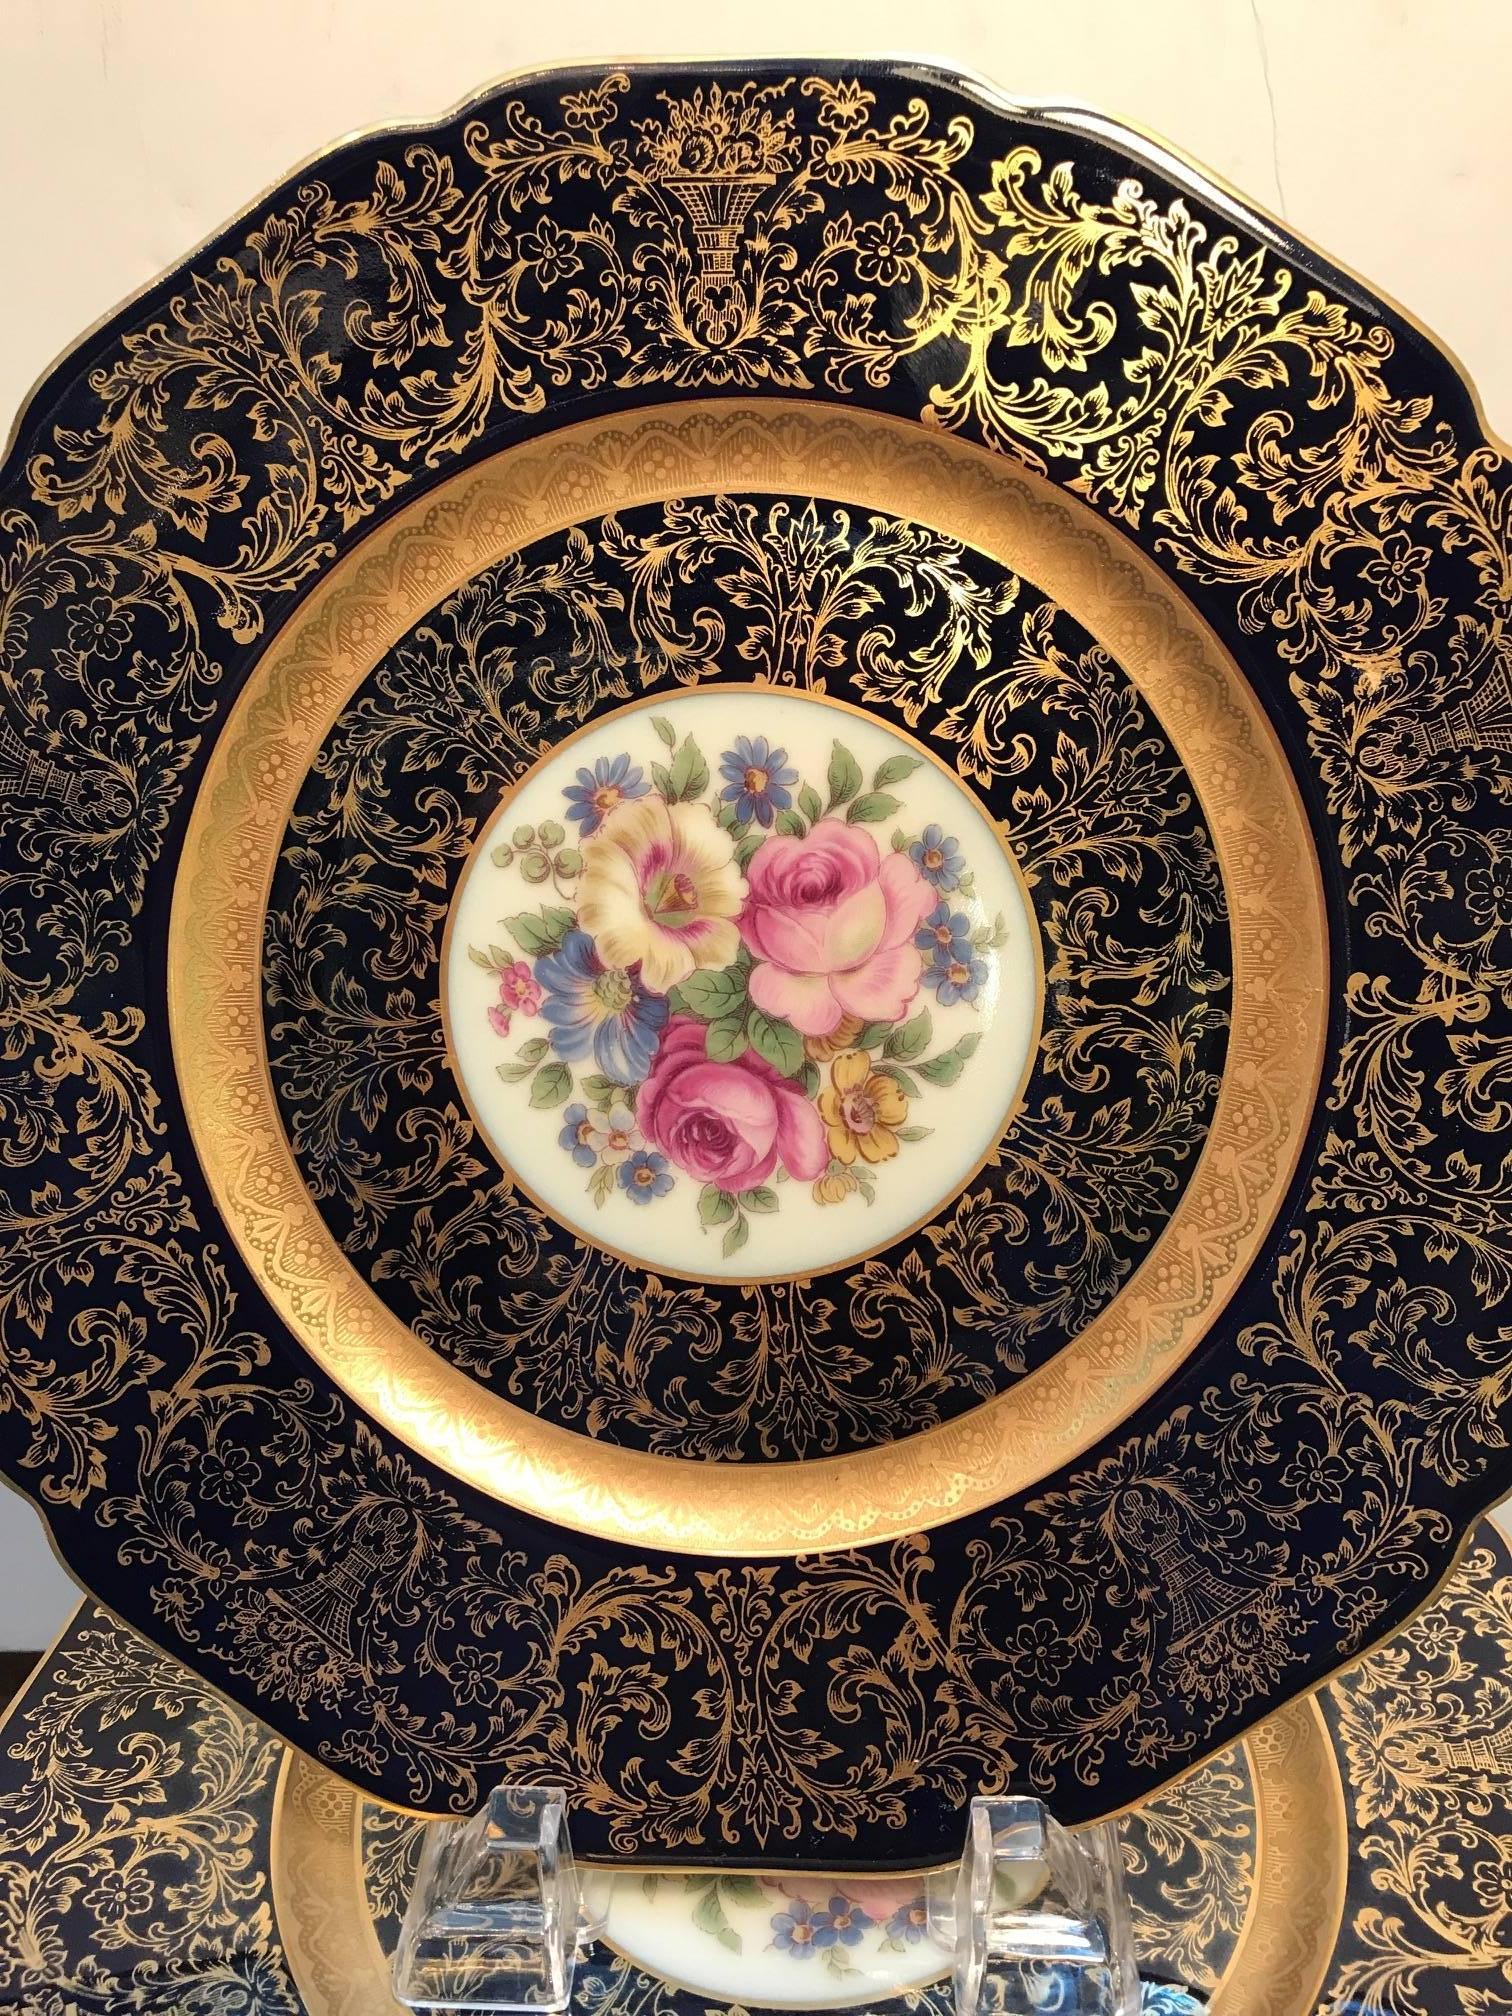 A set of cobalt blue with elaborate gilt border floral service plates. Double ring broad borders with central Dresden floral medallion. The plates are in unused cabinet condition with one plate having a scuff wear to the gilt border. Opulent and